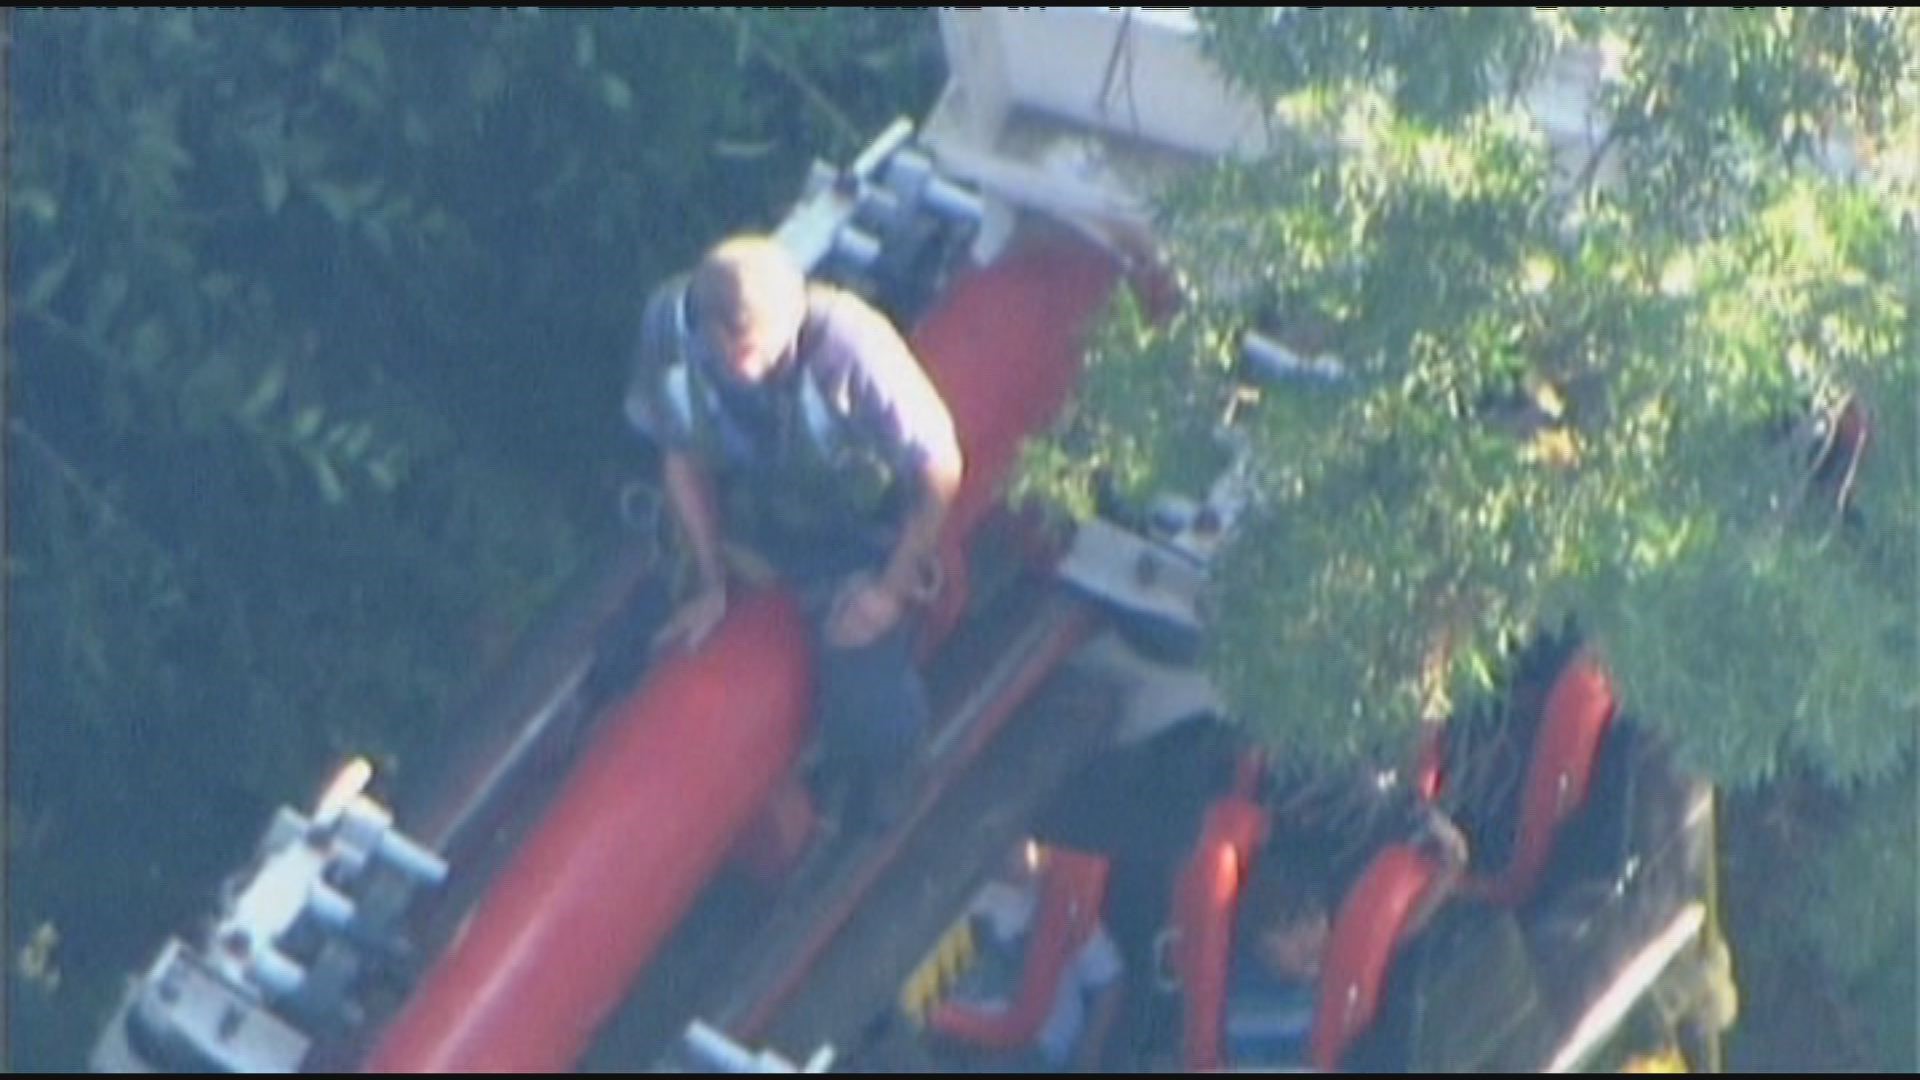 Roller coaster accident injures several people